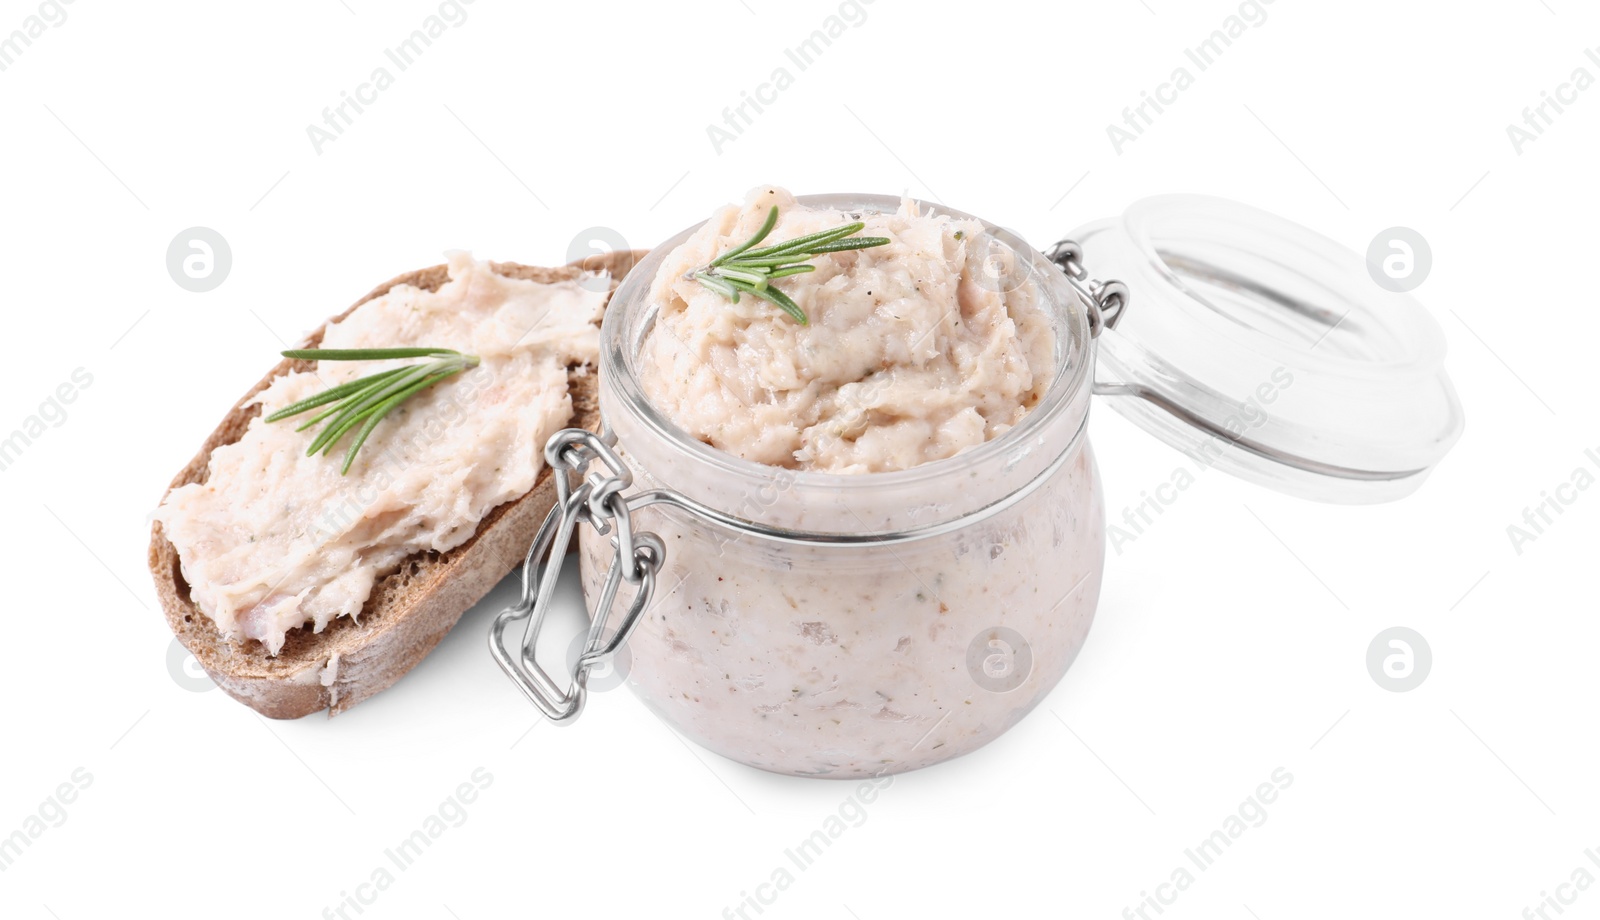 Photo of Delicious lard spread and sandwich on white background